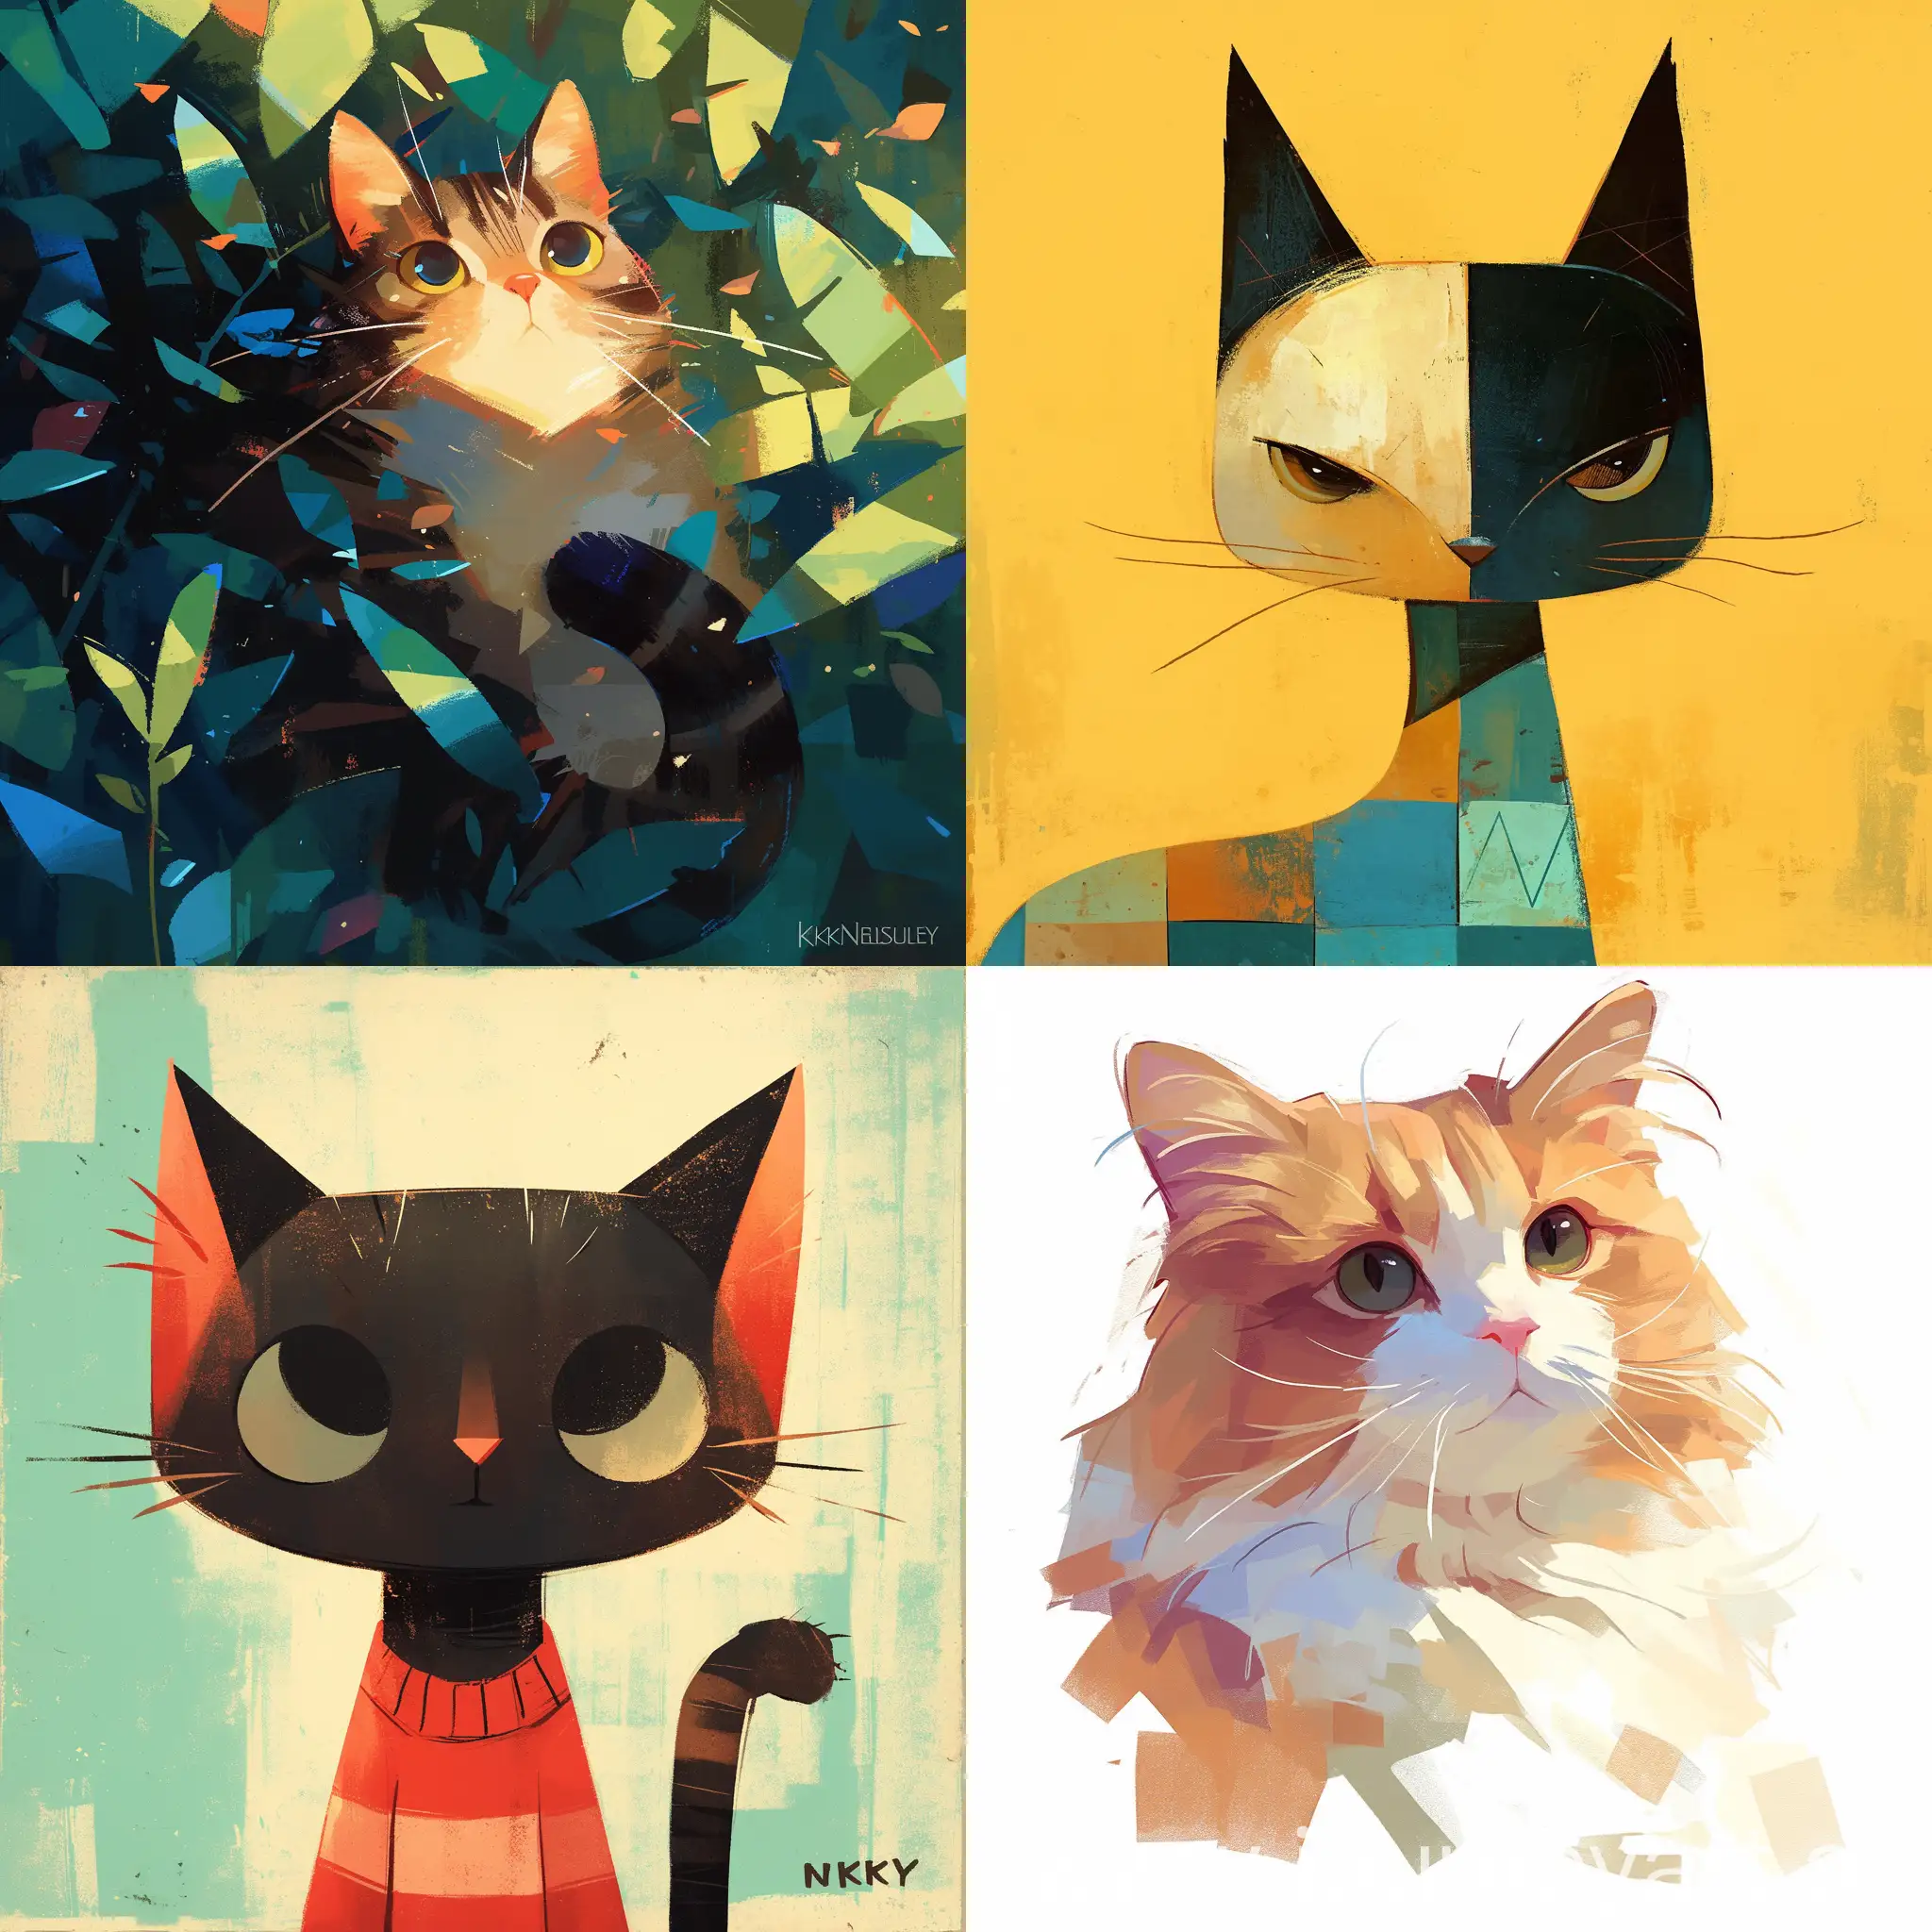 Adorable-Cat-Illustration-by-Keith-Negley-with-Vibrant-Colors